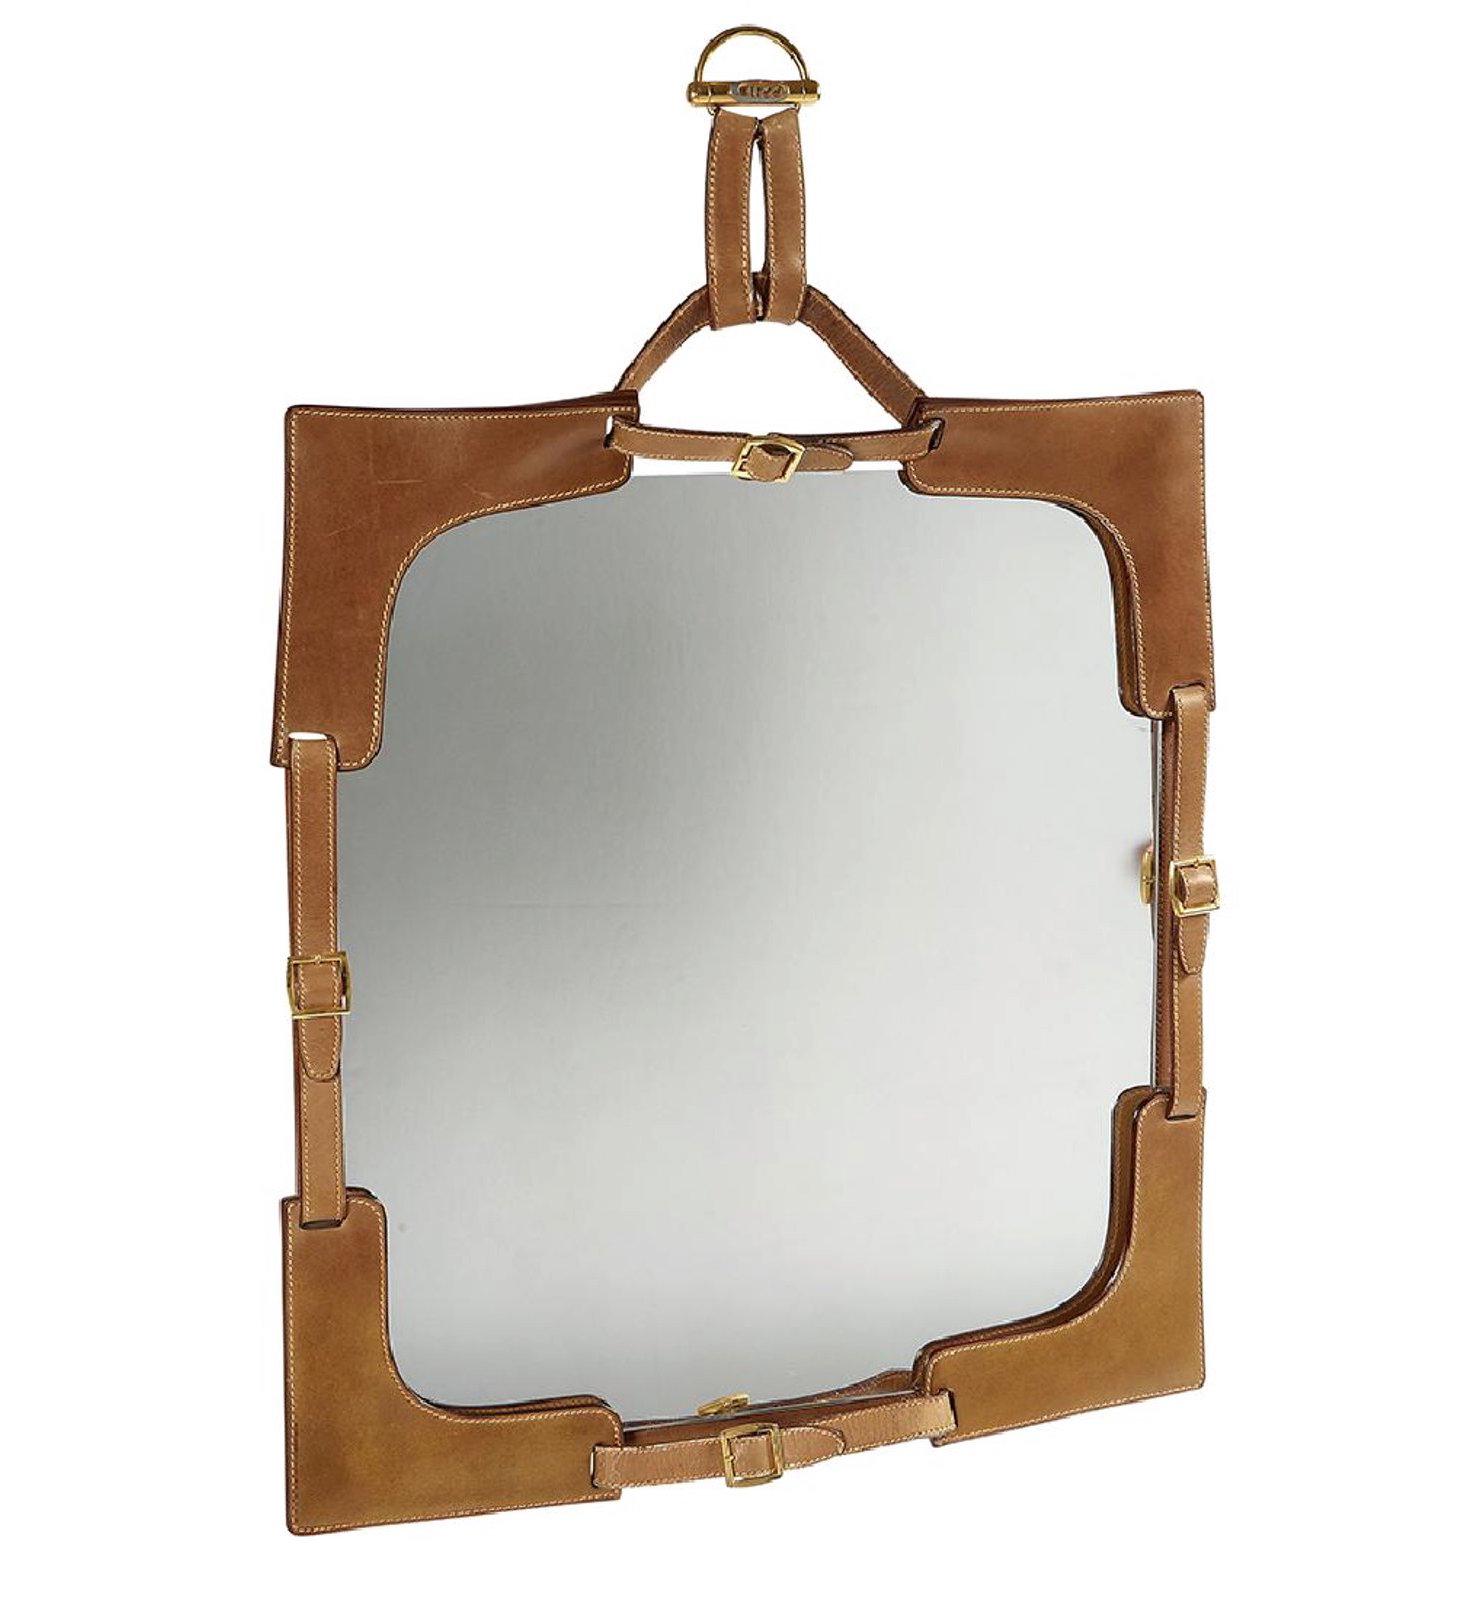 Few vintage artifacts for the home express effortless chic with such clarity as this leather-framed mirror made by Gucci in the 1970s. This uncommon piece delivers all the best Gucci connotations; it is at once luxurious and casual, Italian and